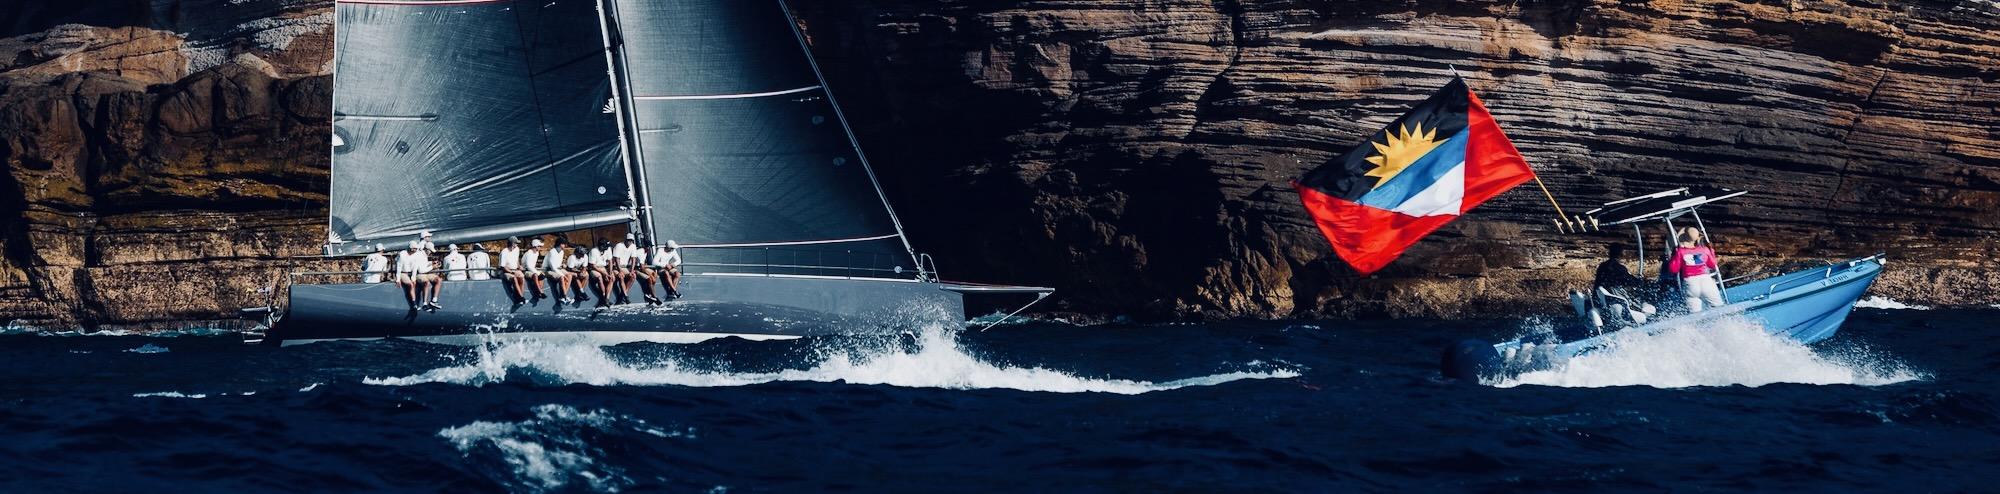 The 2024 Nelson’s Cup Series was back in action on Friday 16th February, with the Antigua 360 Race. Thirty four entries included multihulls racing under MOCRA, three IRC Classes, and the Class40 Division. © Alex Turnbull